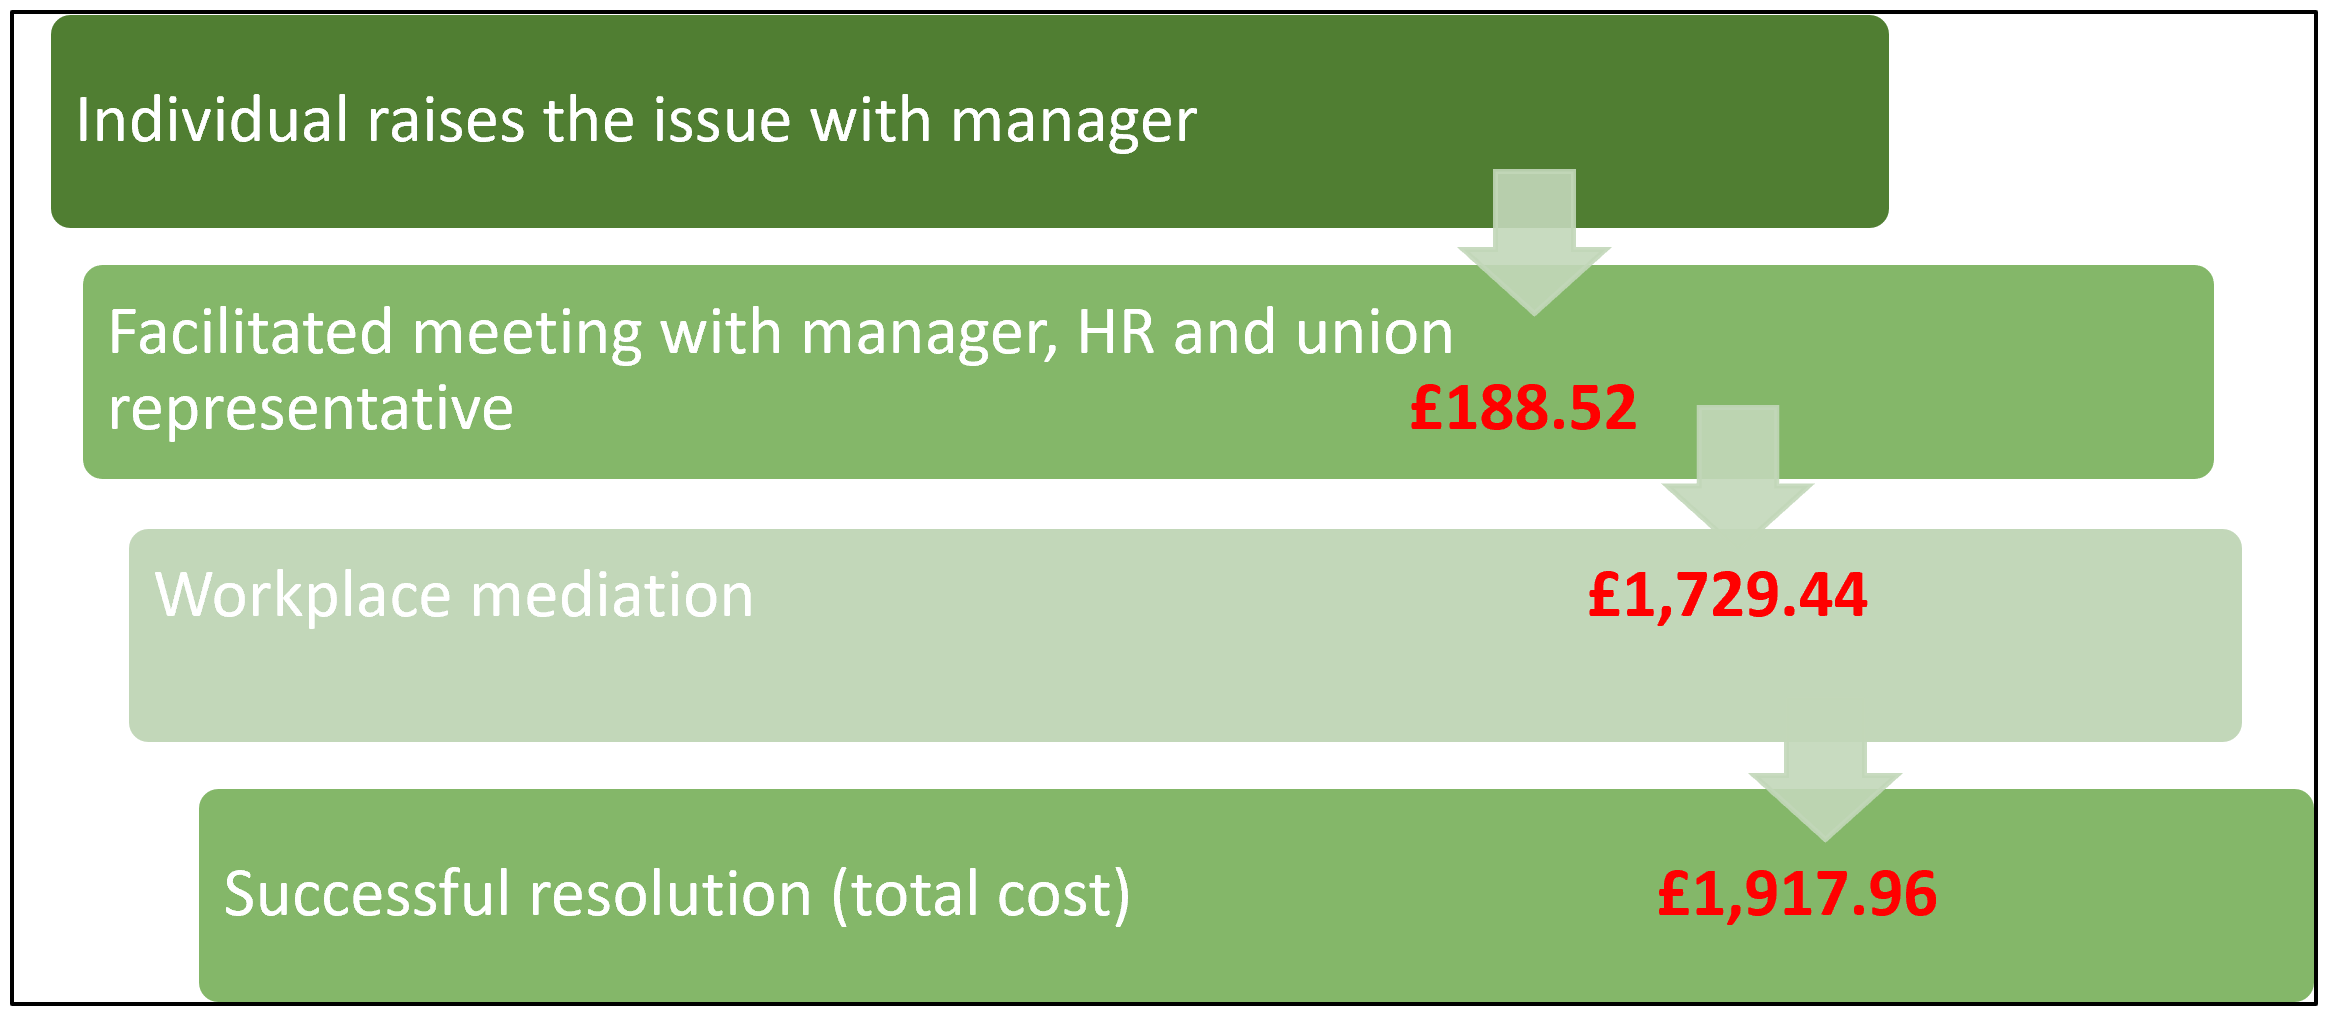 Individual raises the issue with manager. Facilitated meeting with manager, HR and union representative £188.52. Workplace mediation £1,729.44. Successful resolution (total cost) £1,917.96.